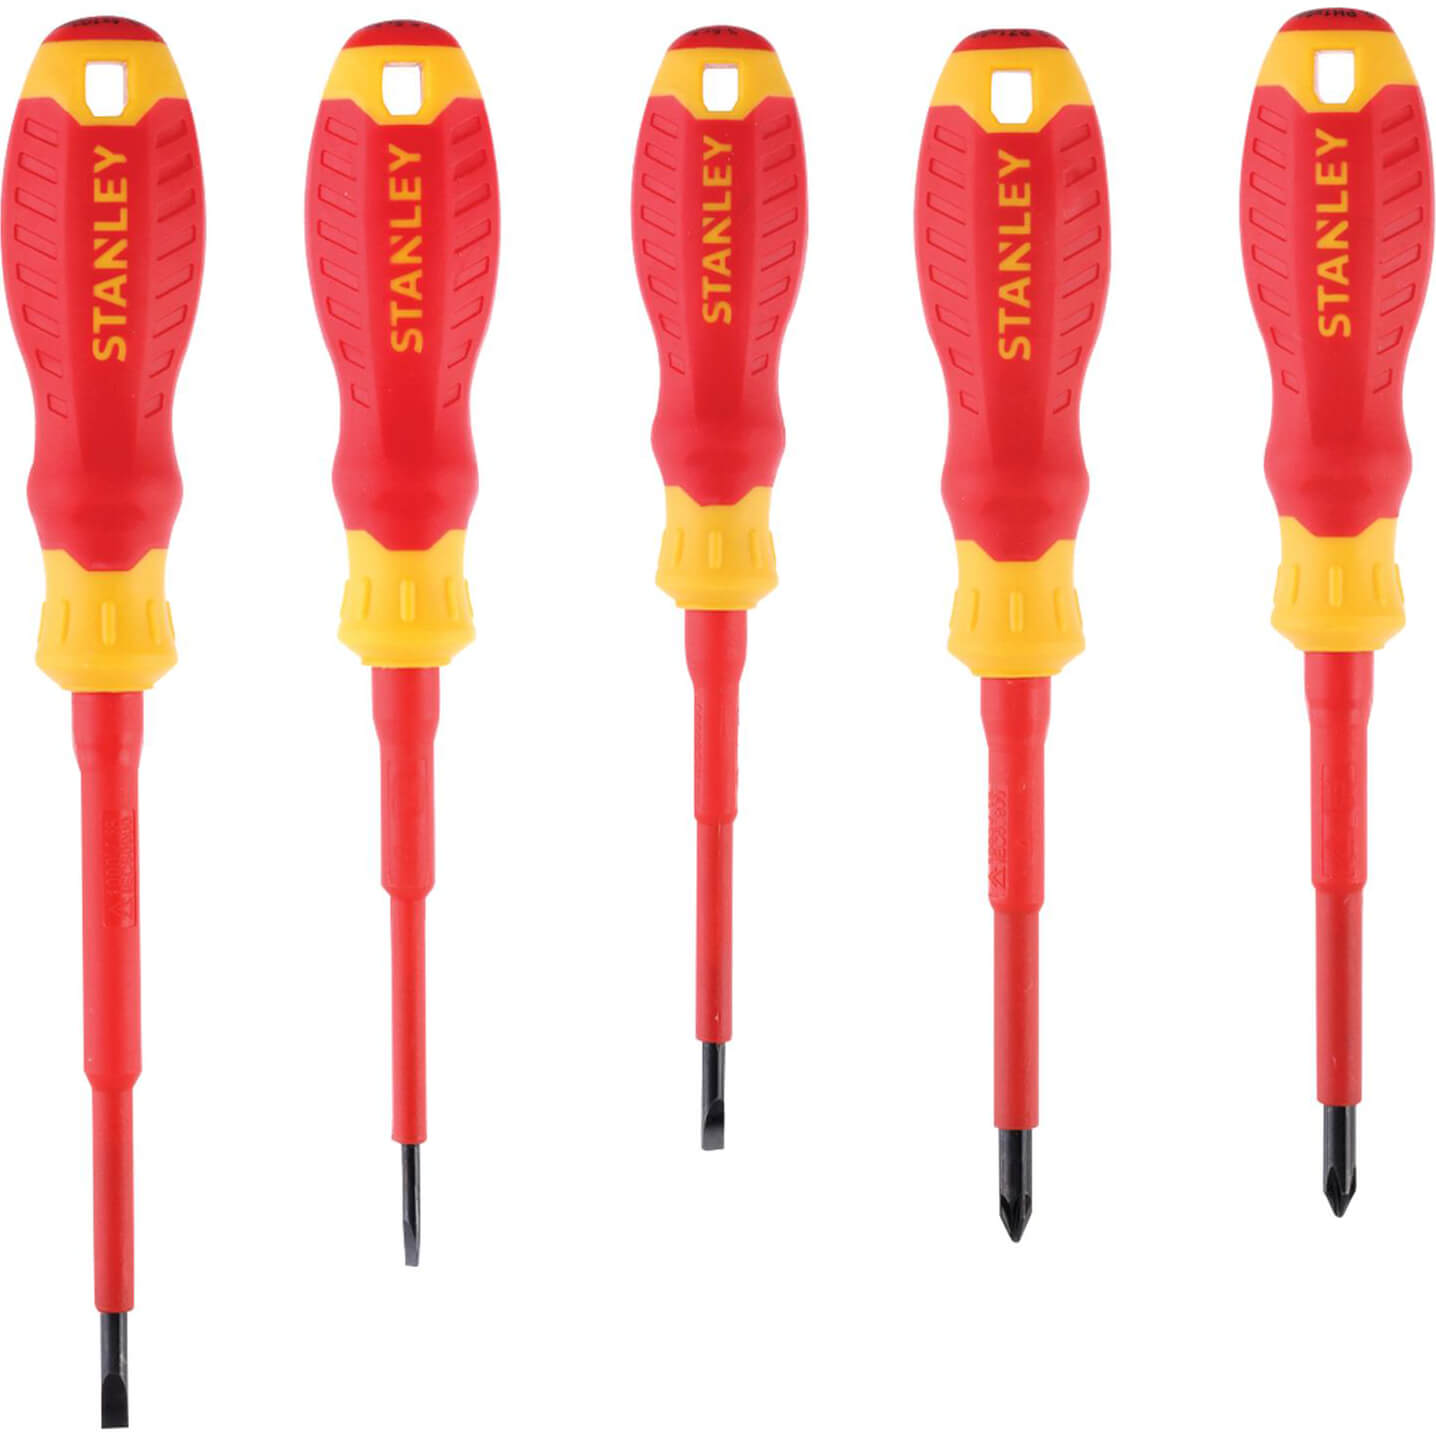 Photos - Tool Kit Stanley 5 Piece VDE Insulated Screwdriver Set STHT65556-0 